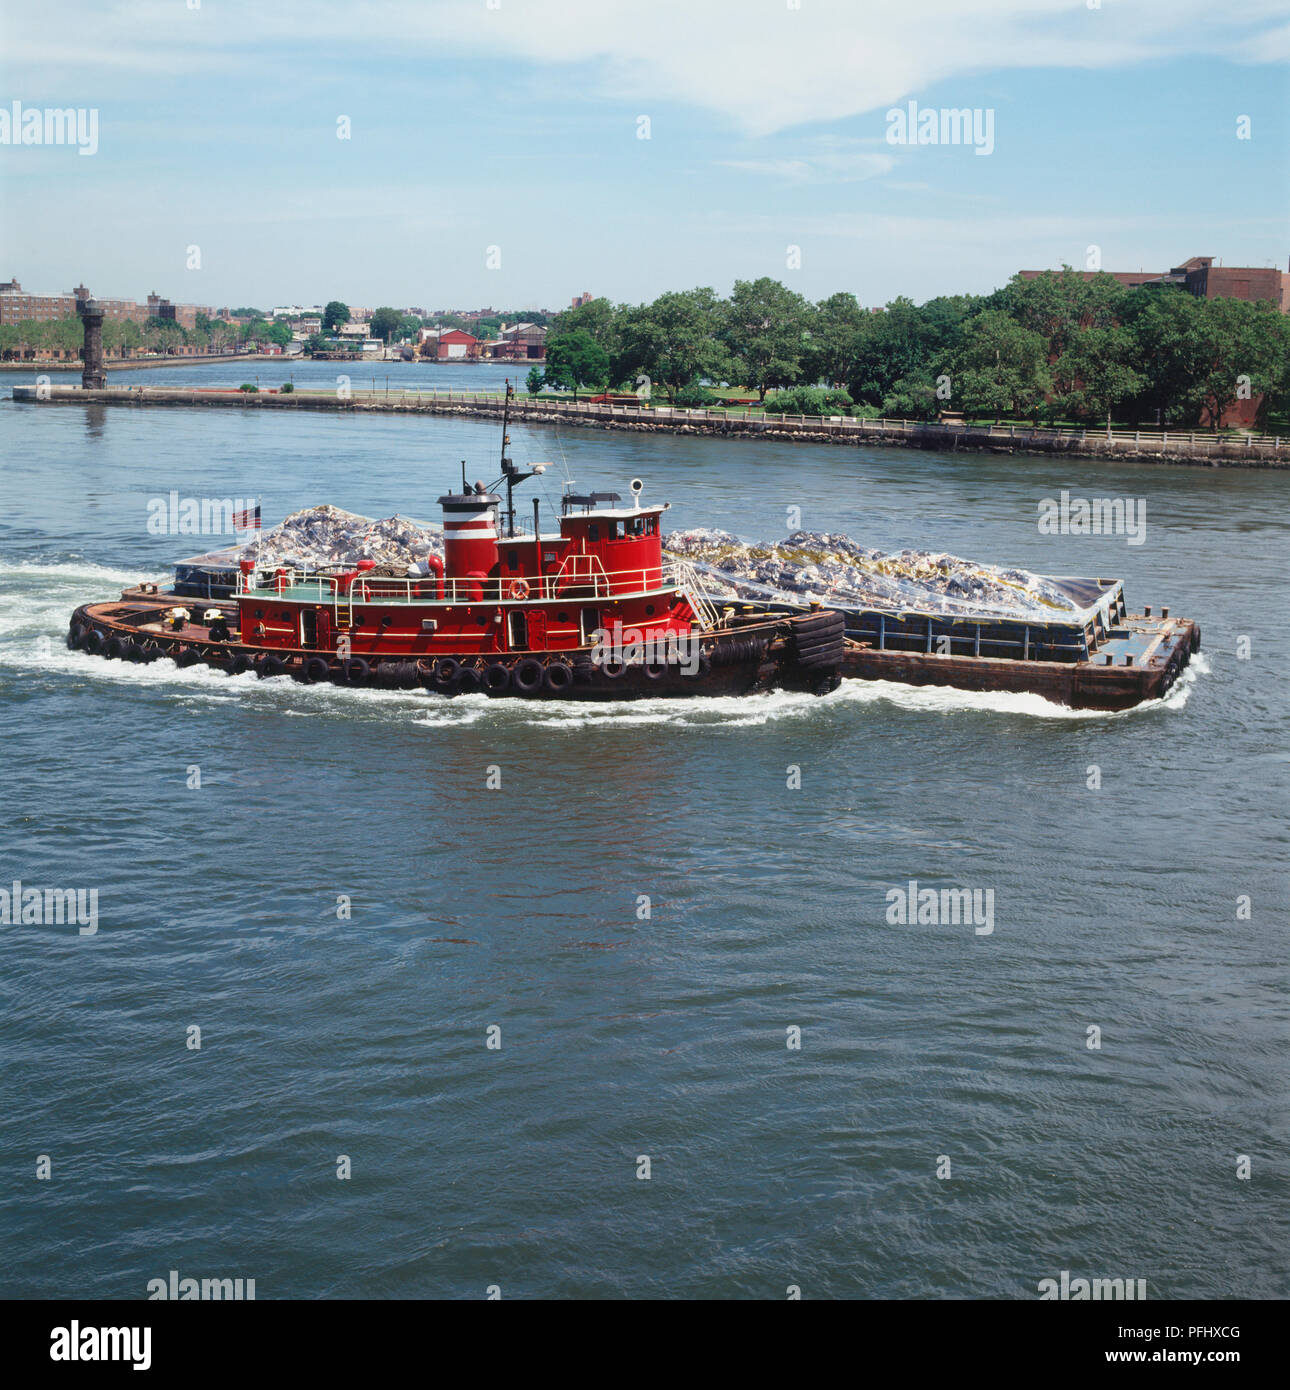 Tug boat with single garbage barge on lake, side view. Stock Photo